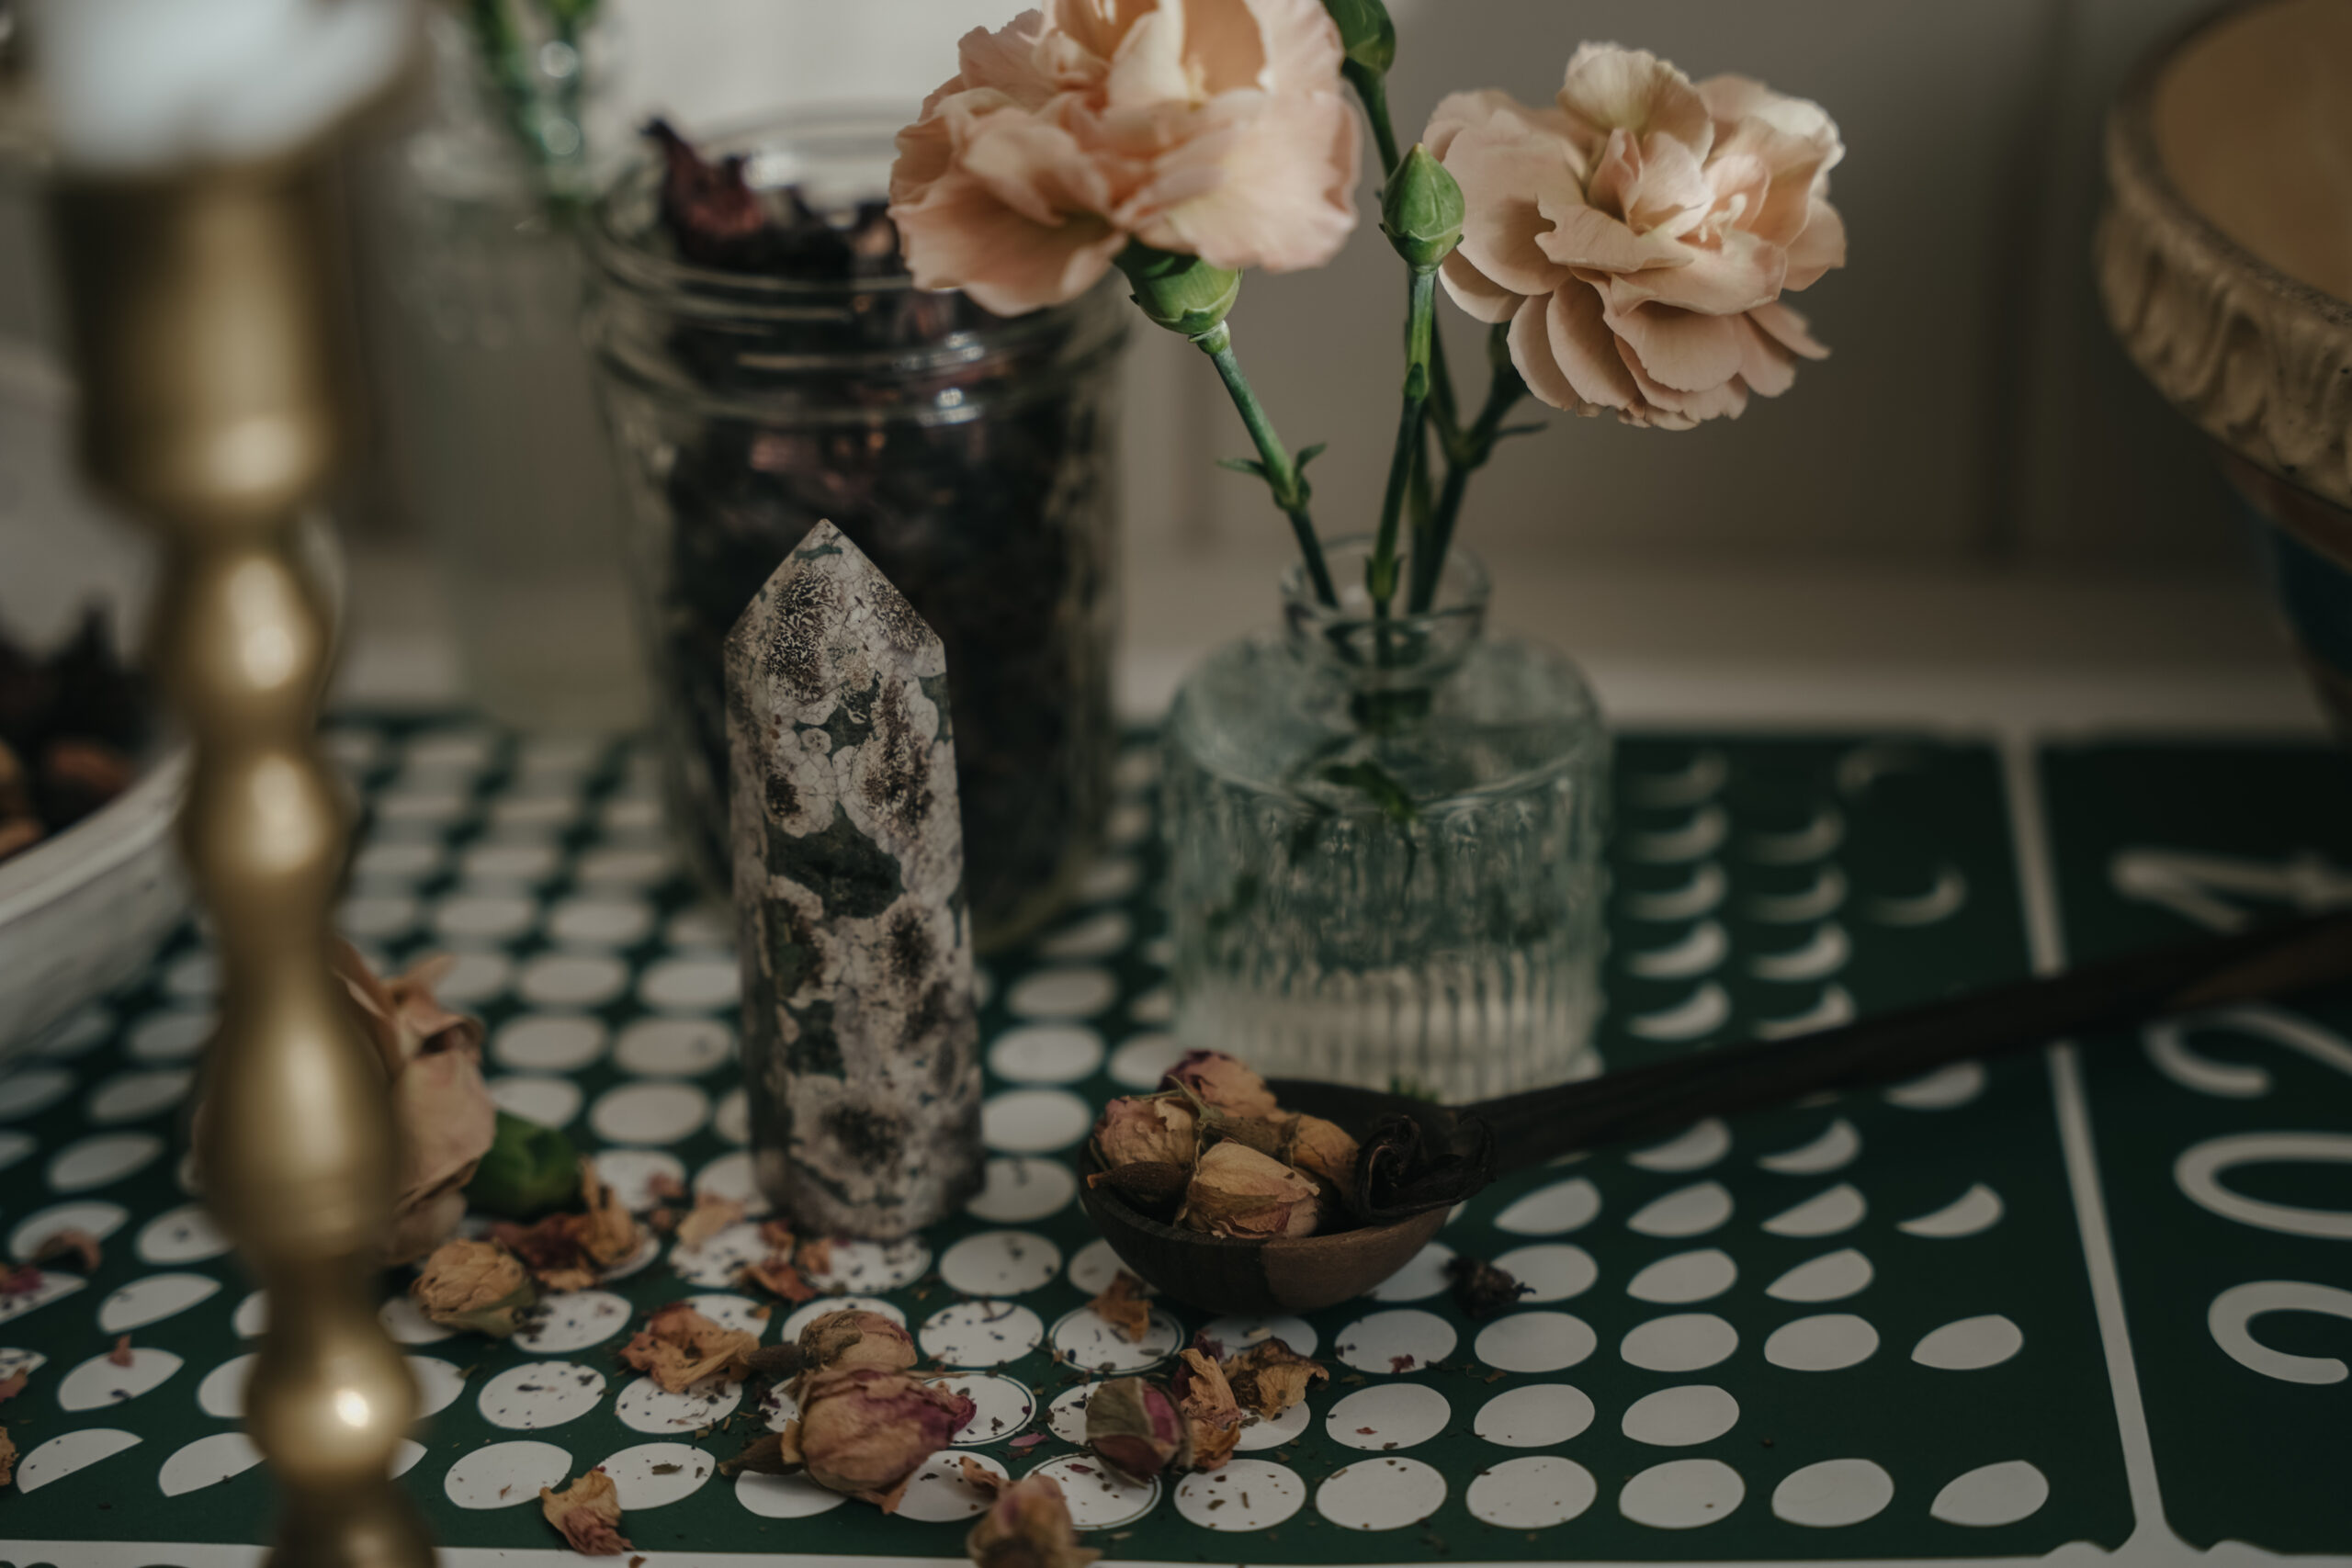 rose buds on a spoon and sprinkled on a moon calendar with vase and jar of flowers in the background